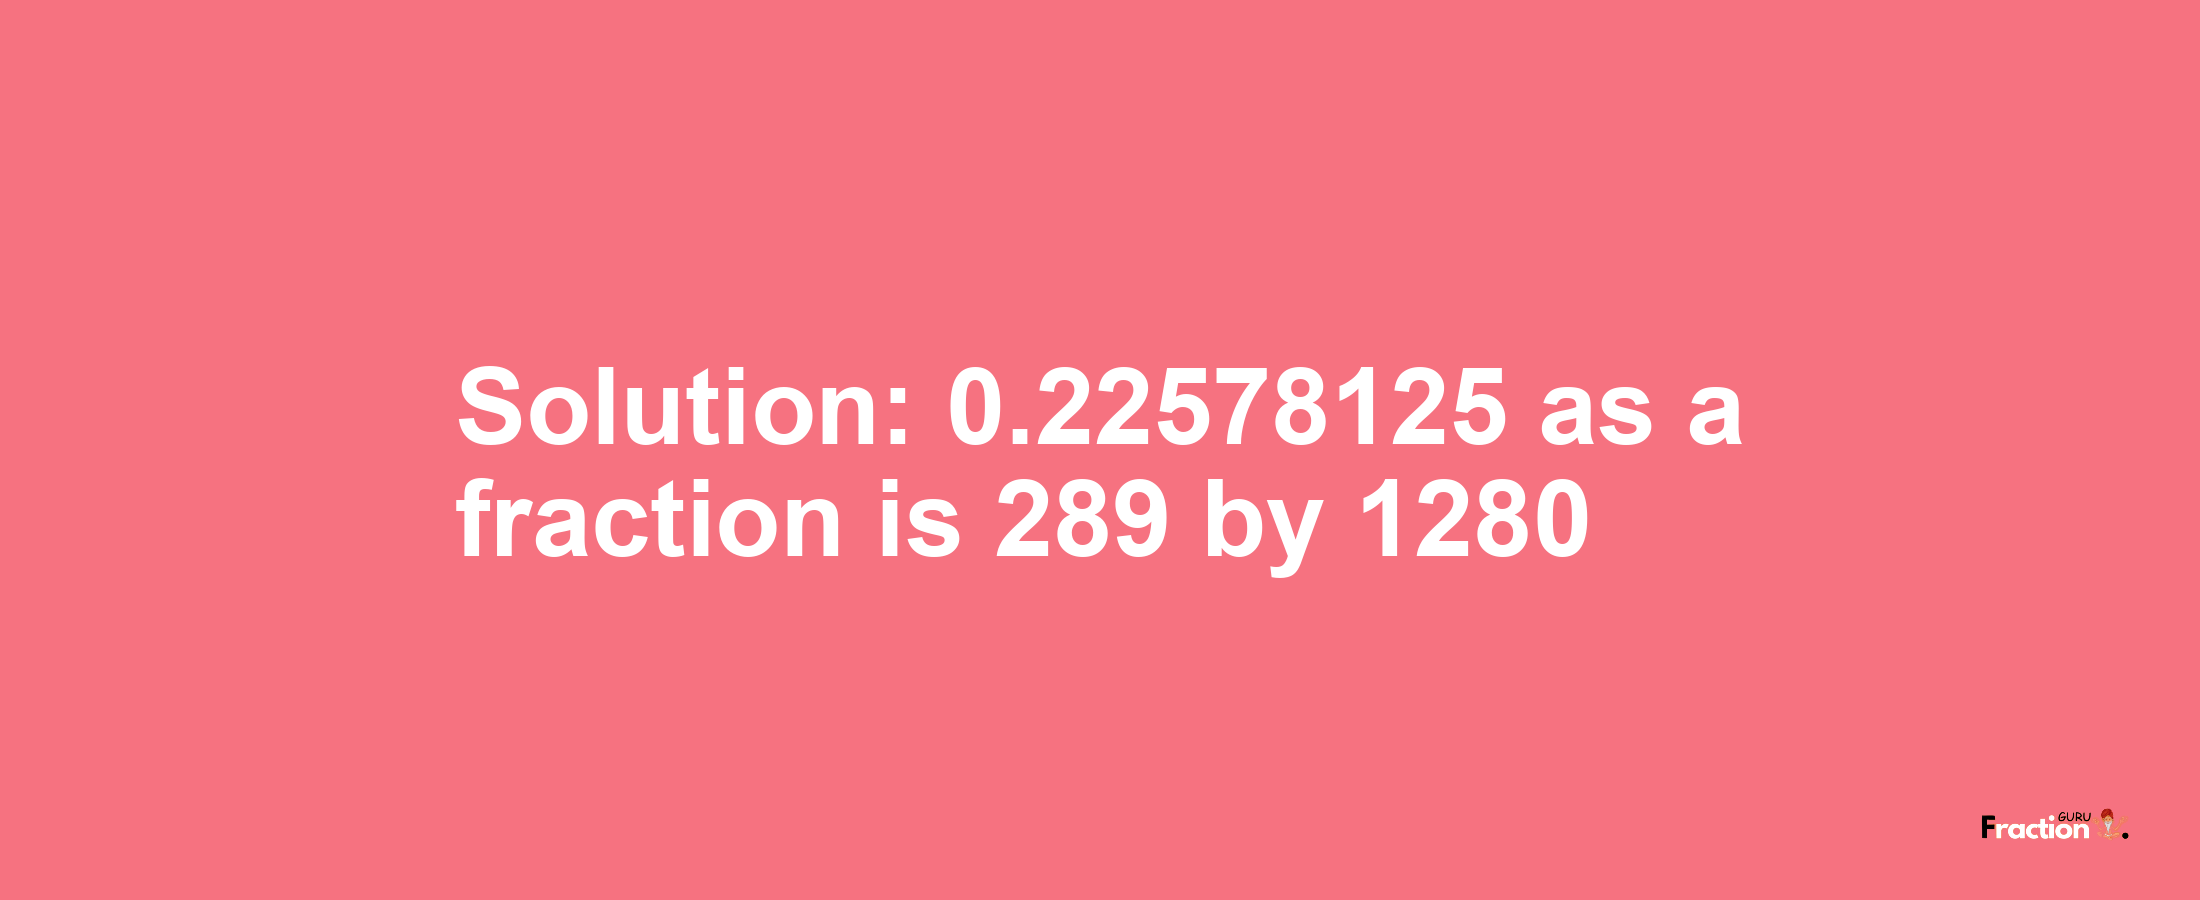 Solution:0.22578125 as a fraction is 289/1280